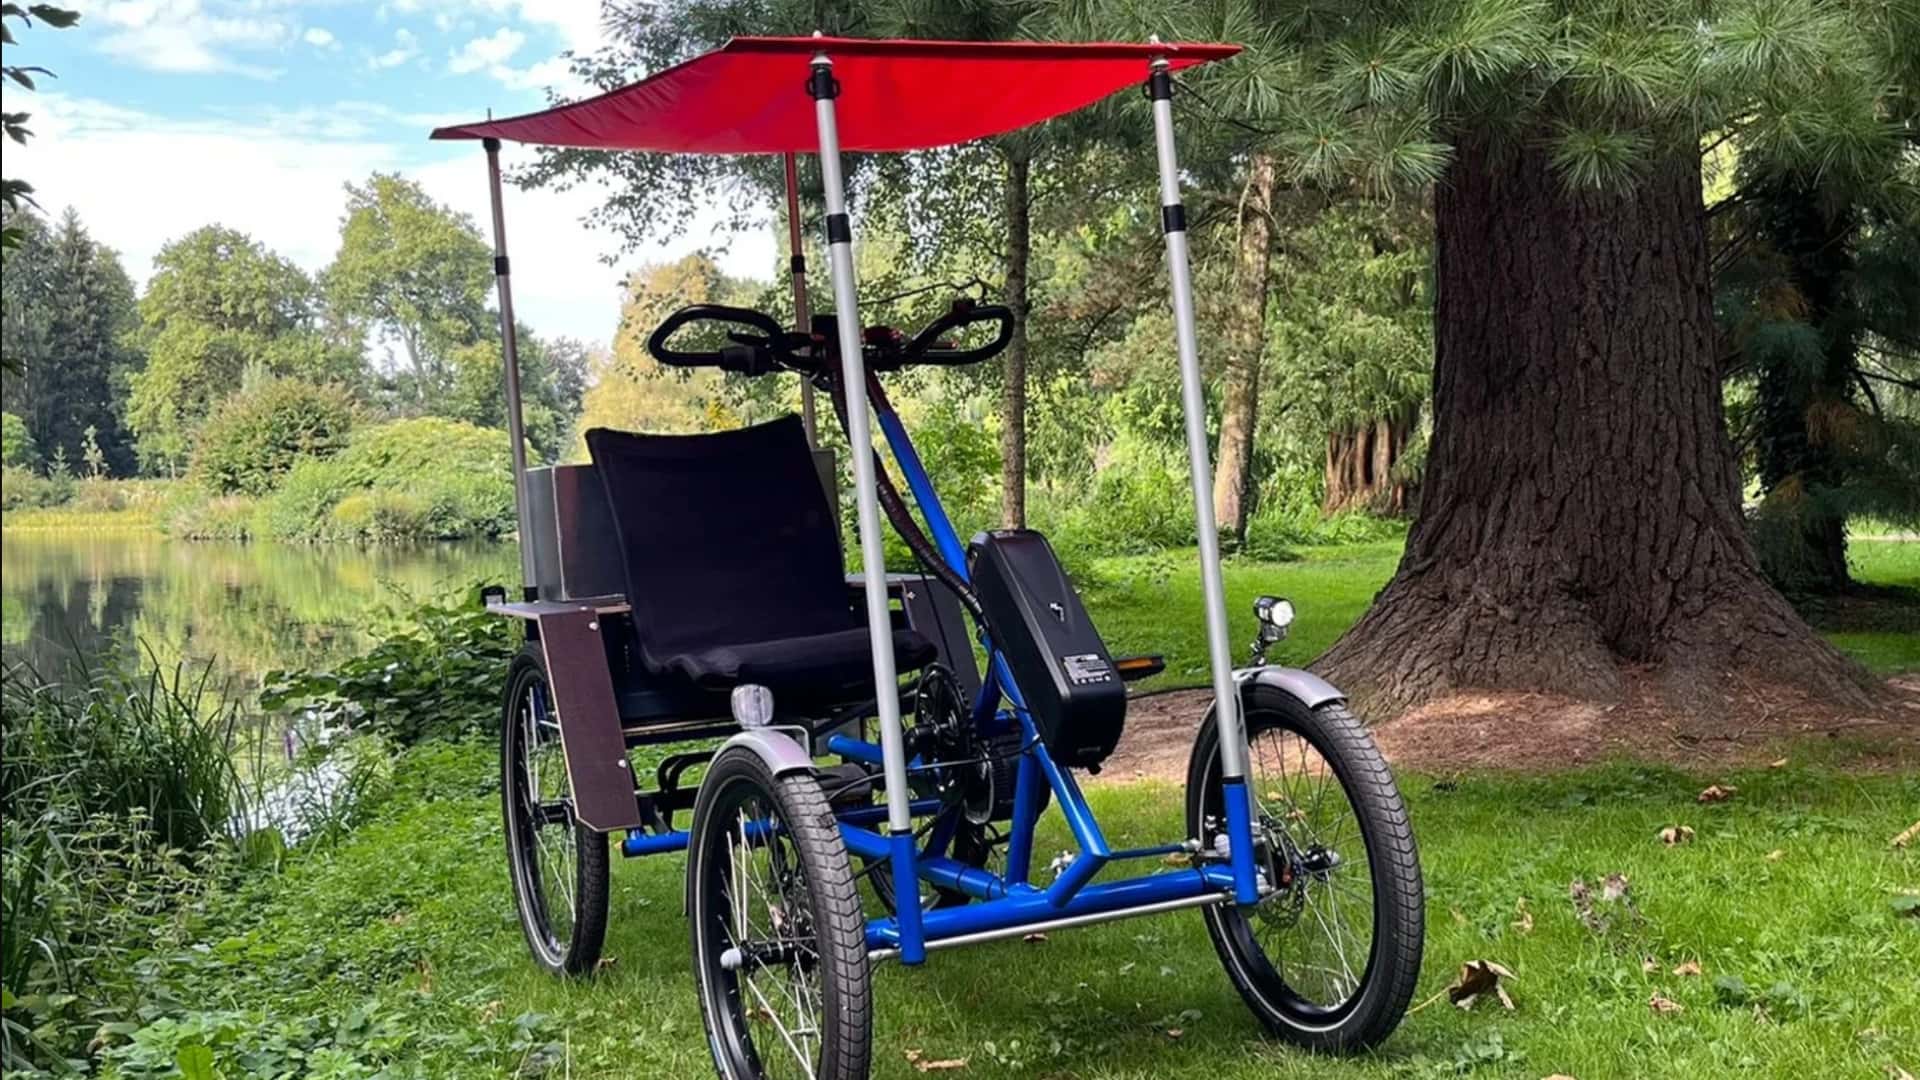 e-velo-cabrio can shuttle you and your stuff around even when it's raining